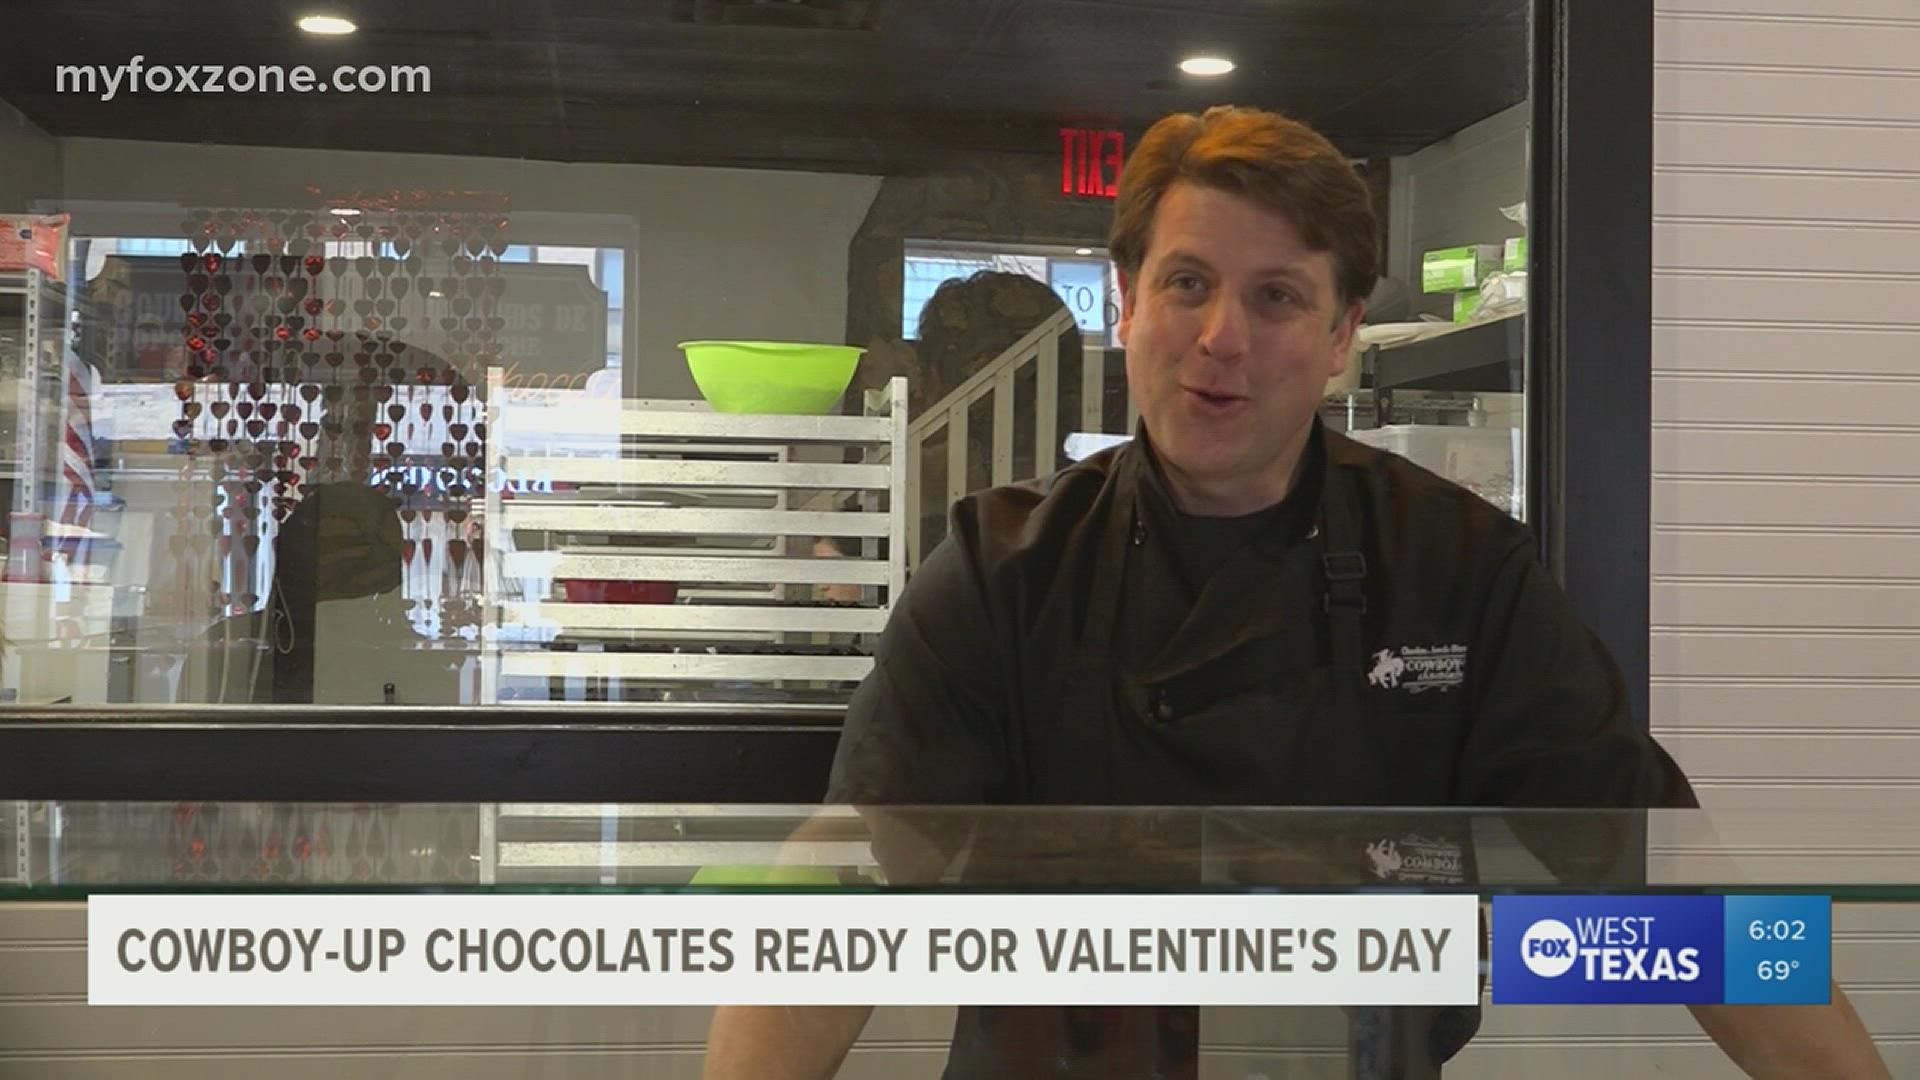 The new West Texas chocolate shop is preparing sweet treats for the upcoming holiday.